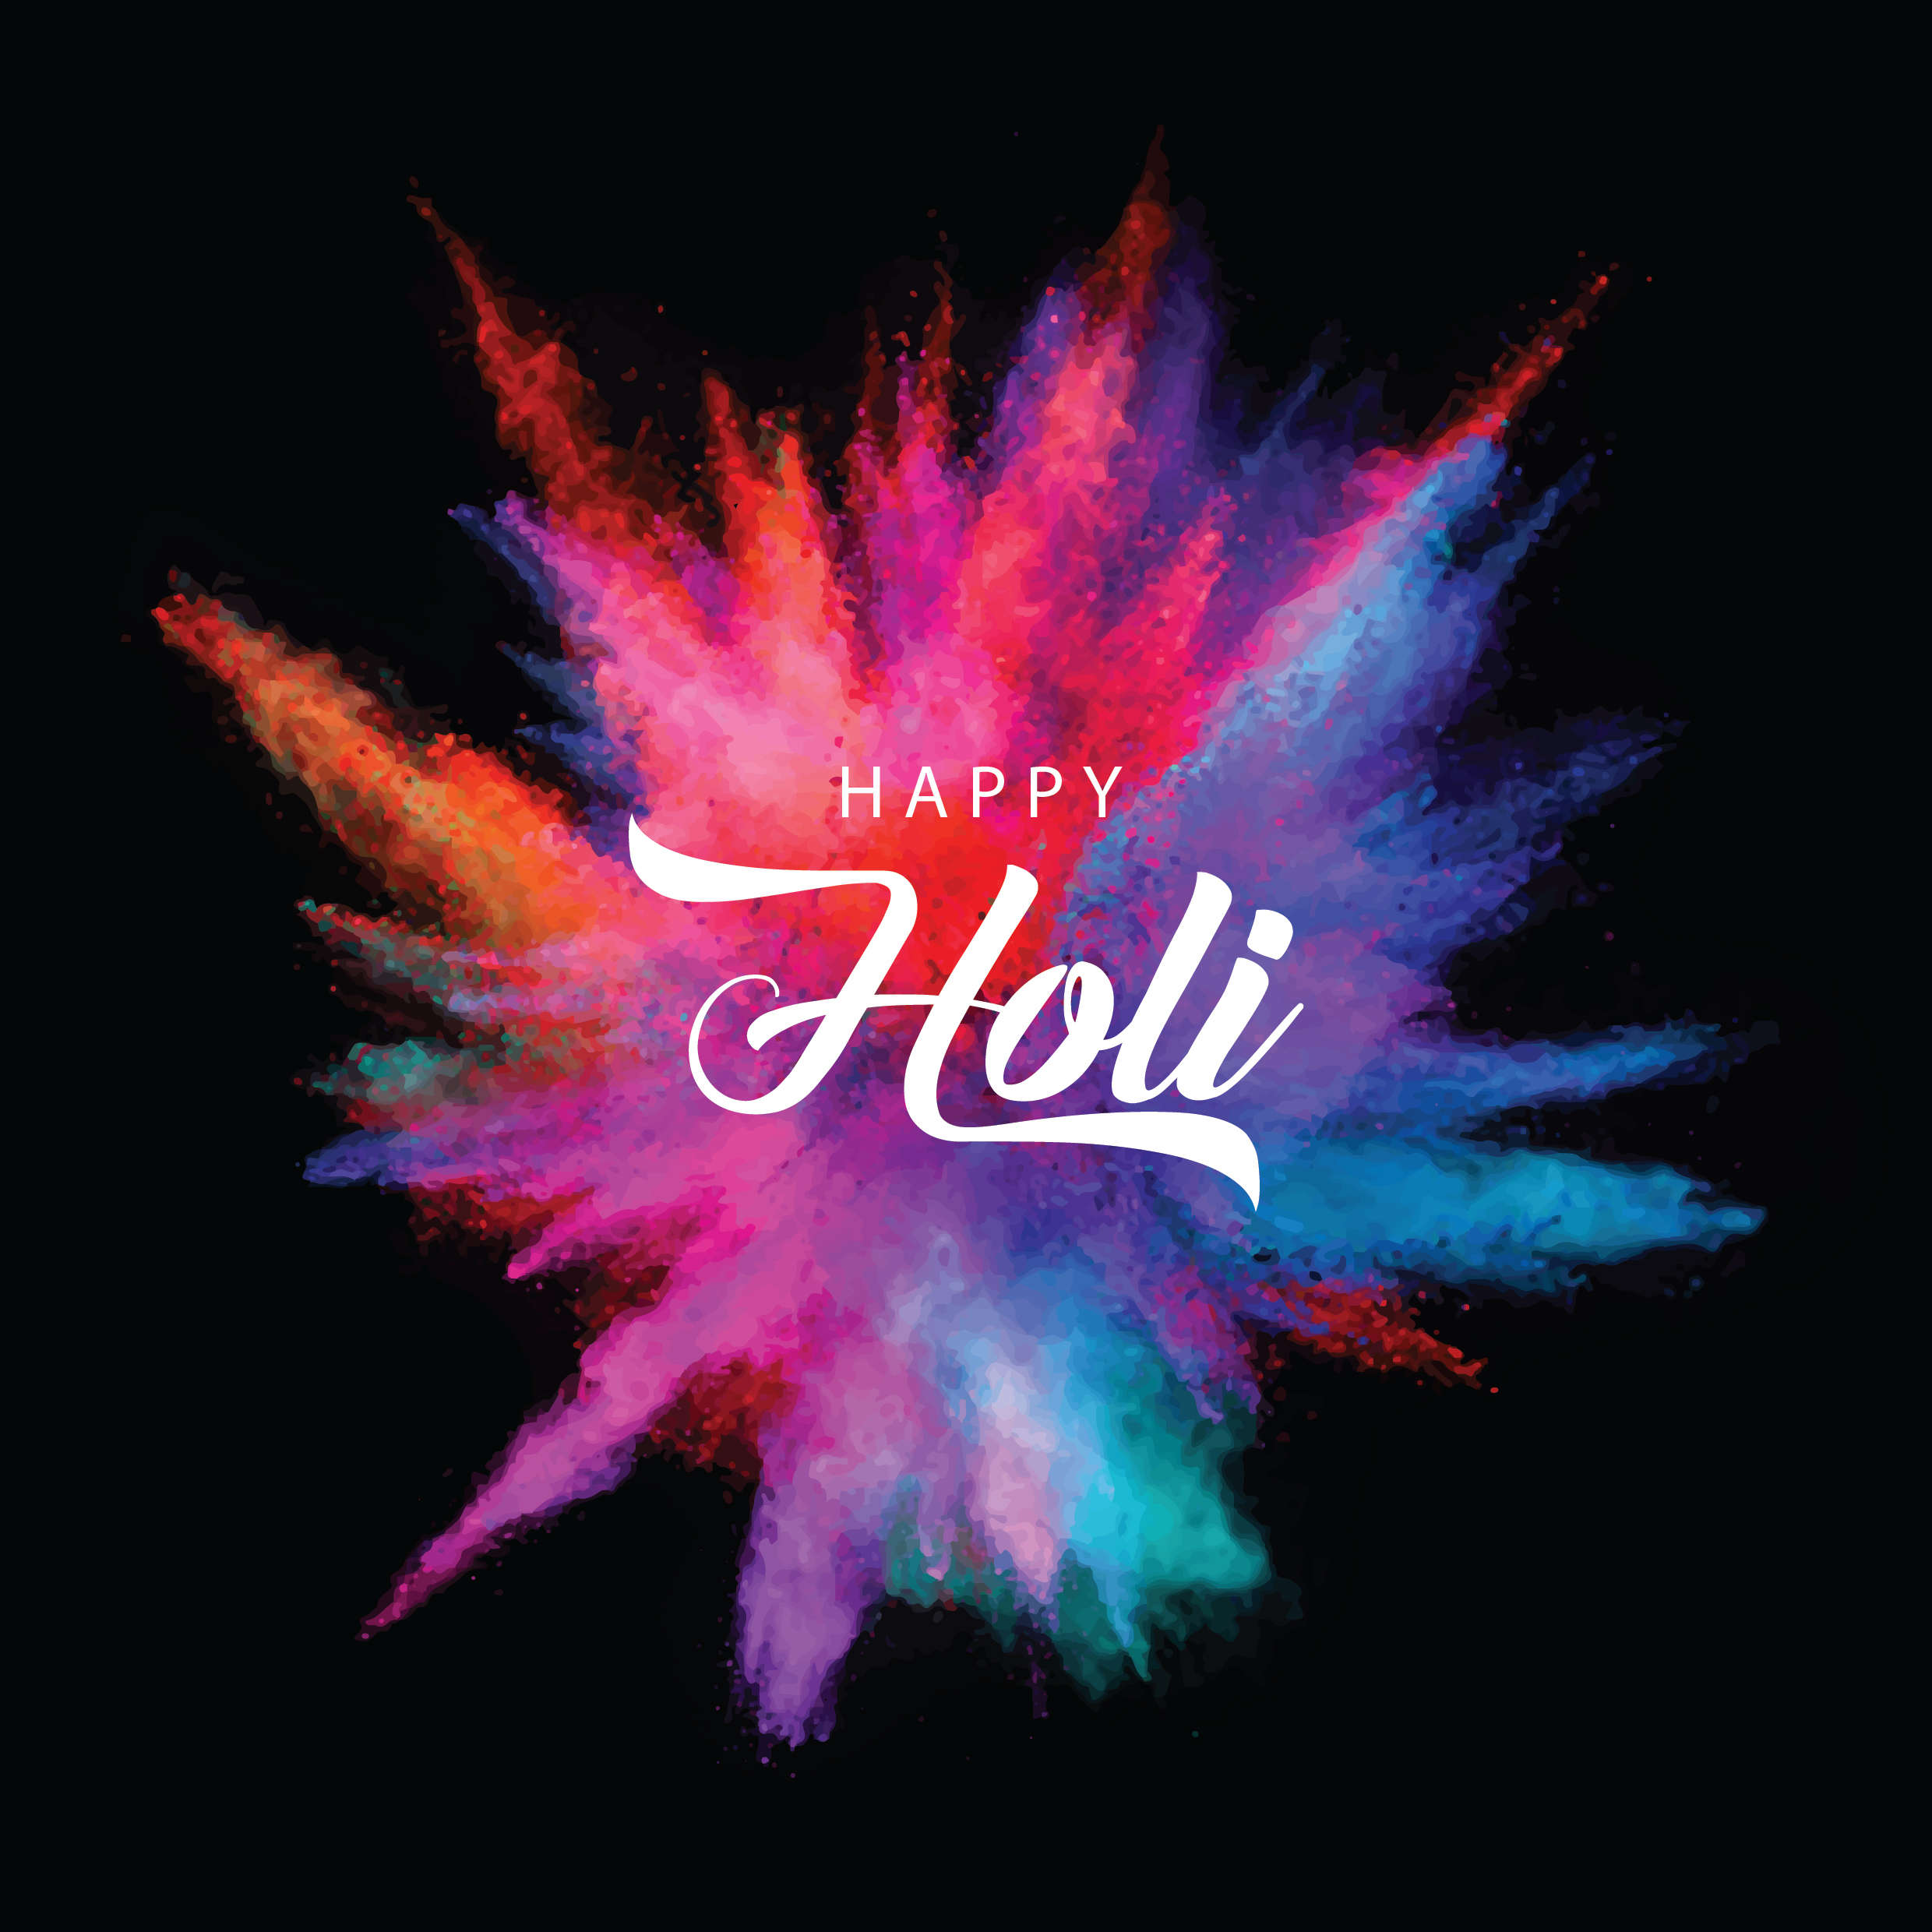 Happy Holi 2020 Memes, Funny Images, Jokes, Wishes, Messages, Pictures,  Status & Cards: Funny memes and pictures to share with your family and  friends